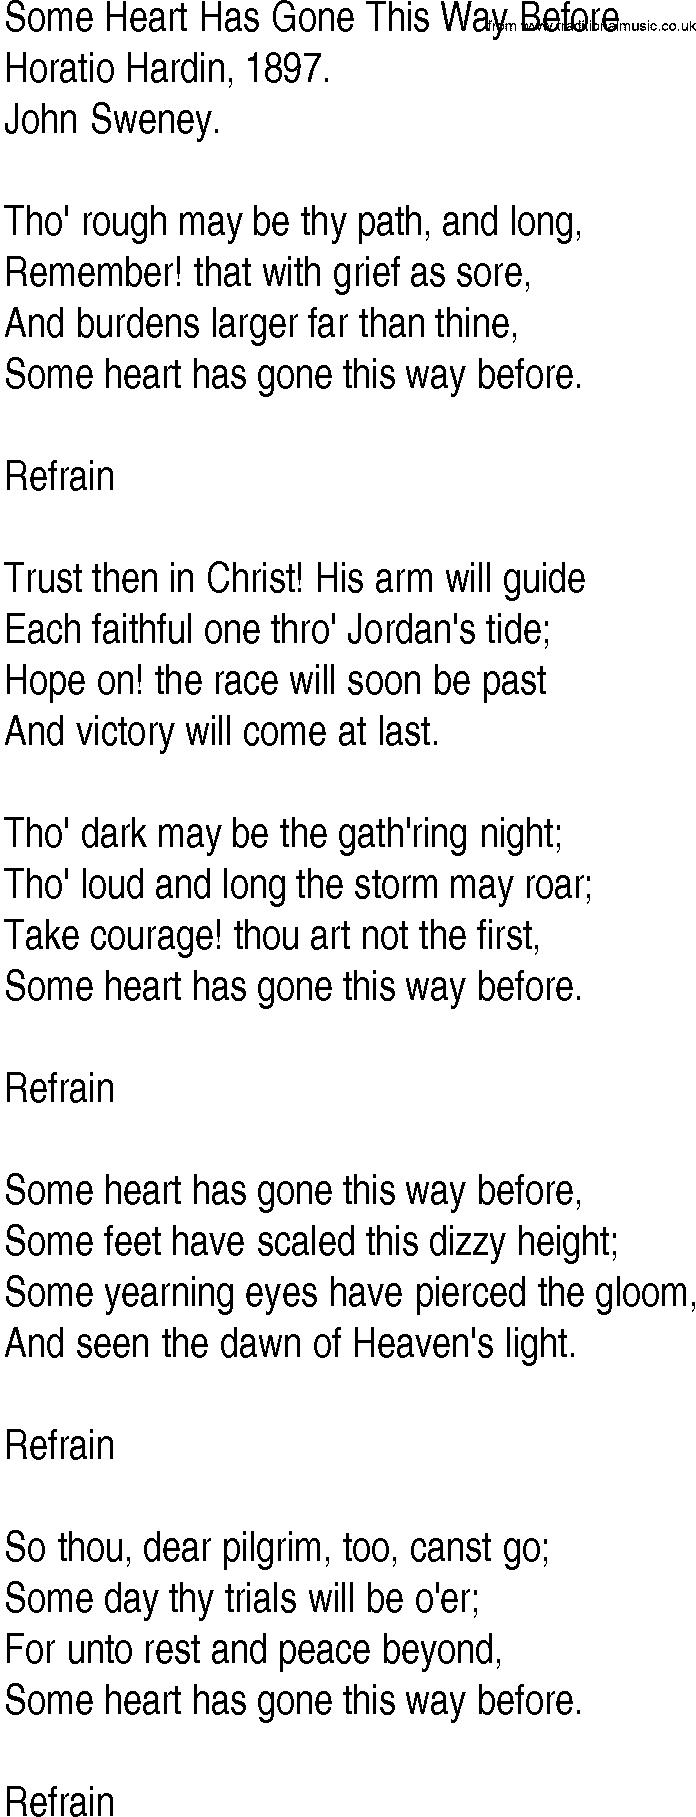 Hymn and Gospel Song: Some Heart Has Gone This Way Before by Horatio Hardin lyrics